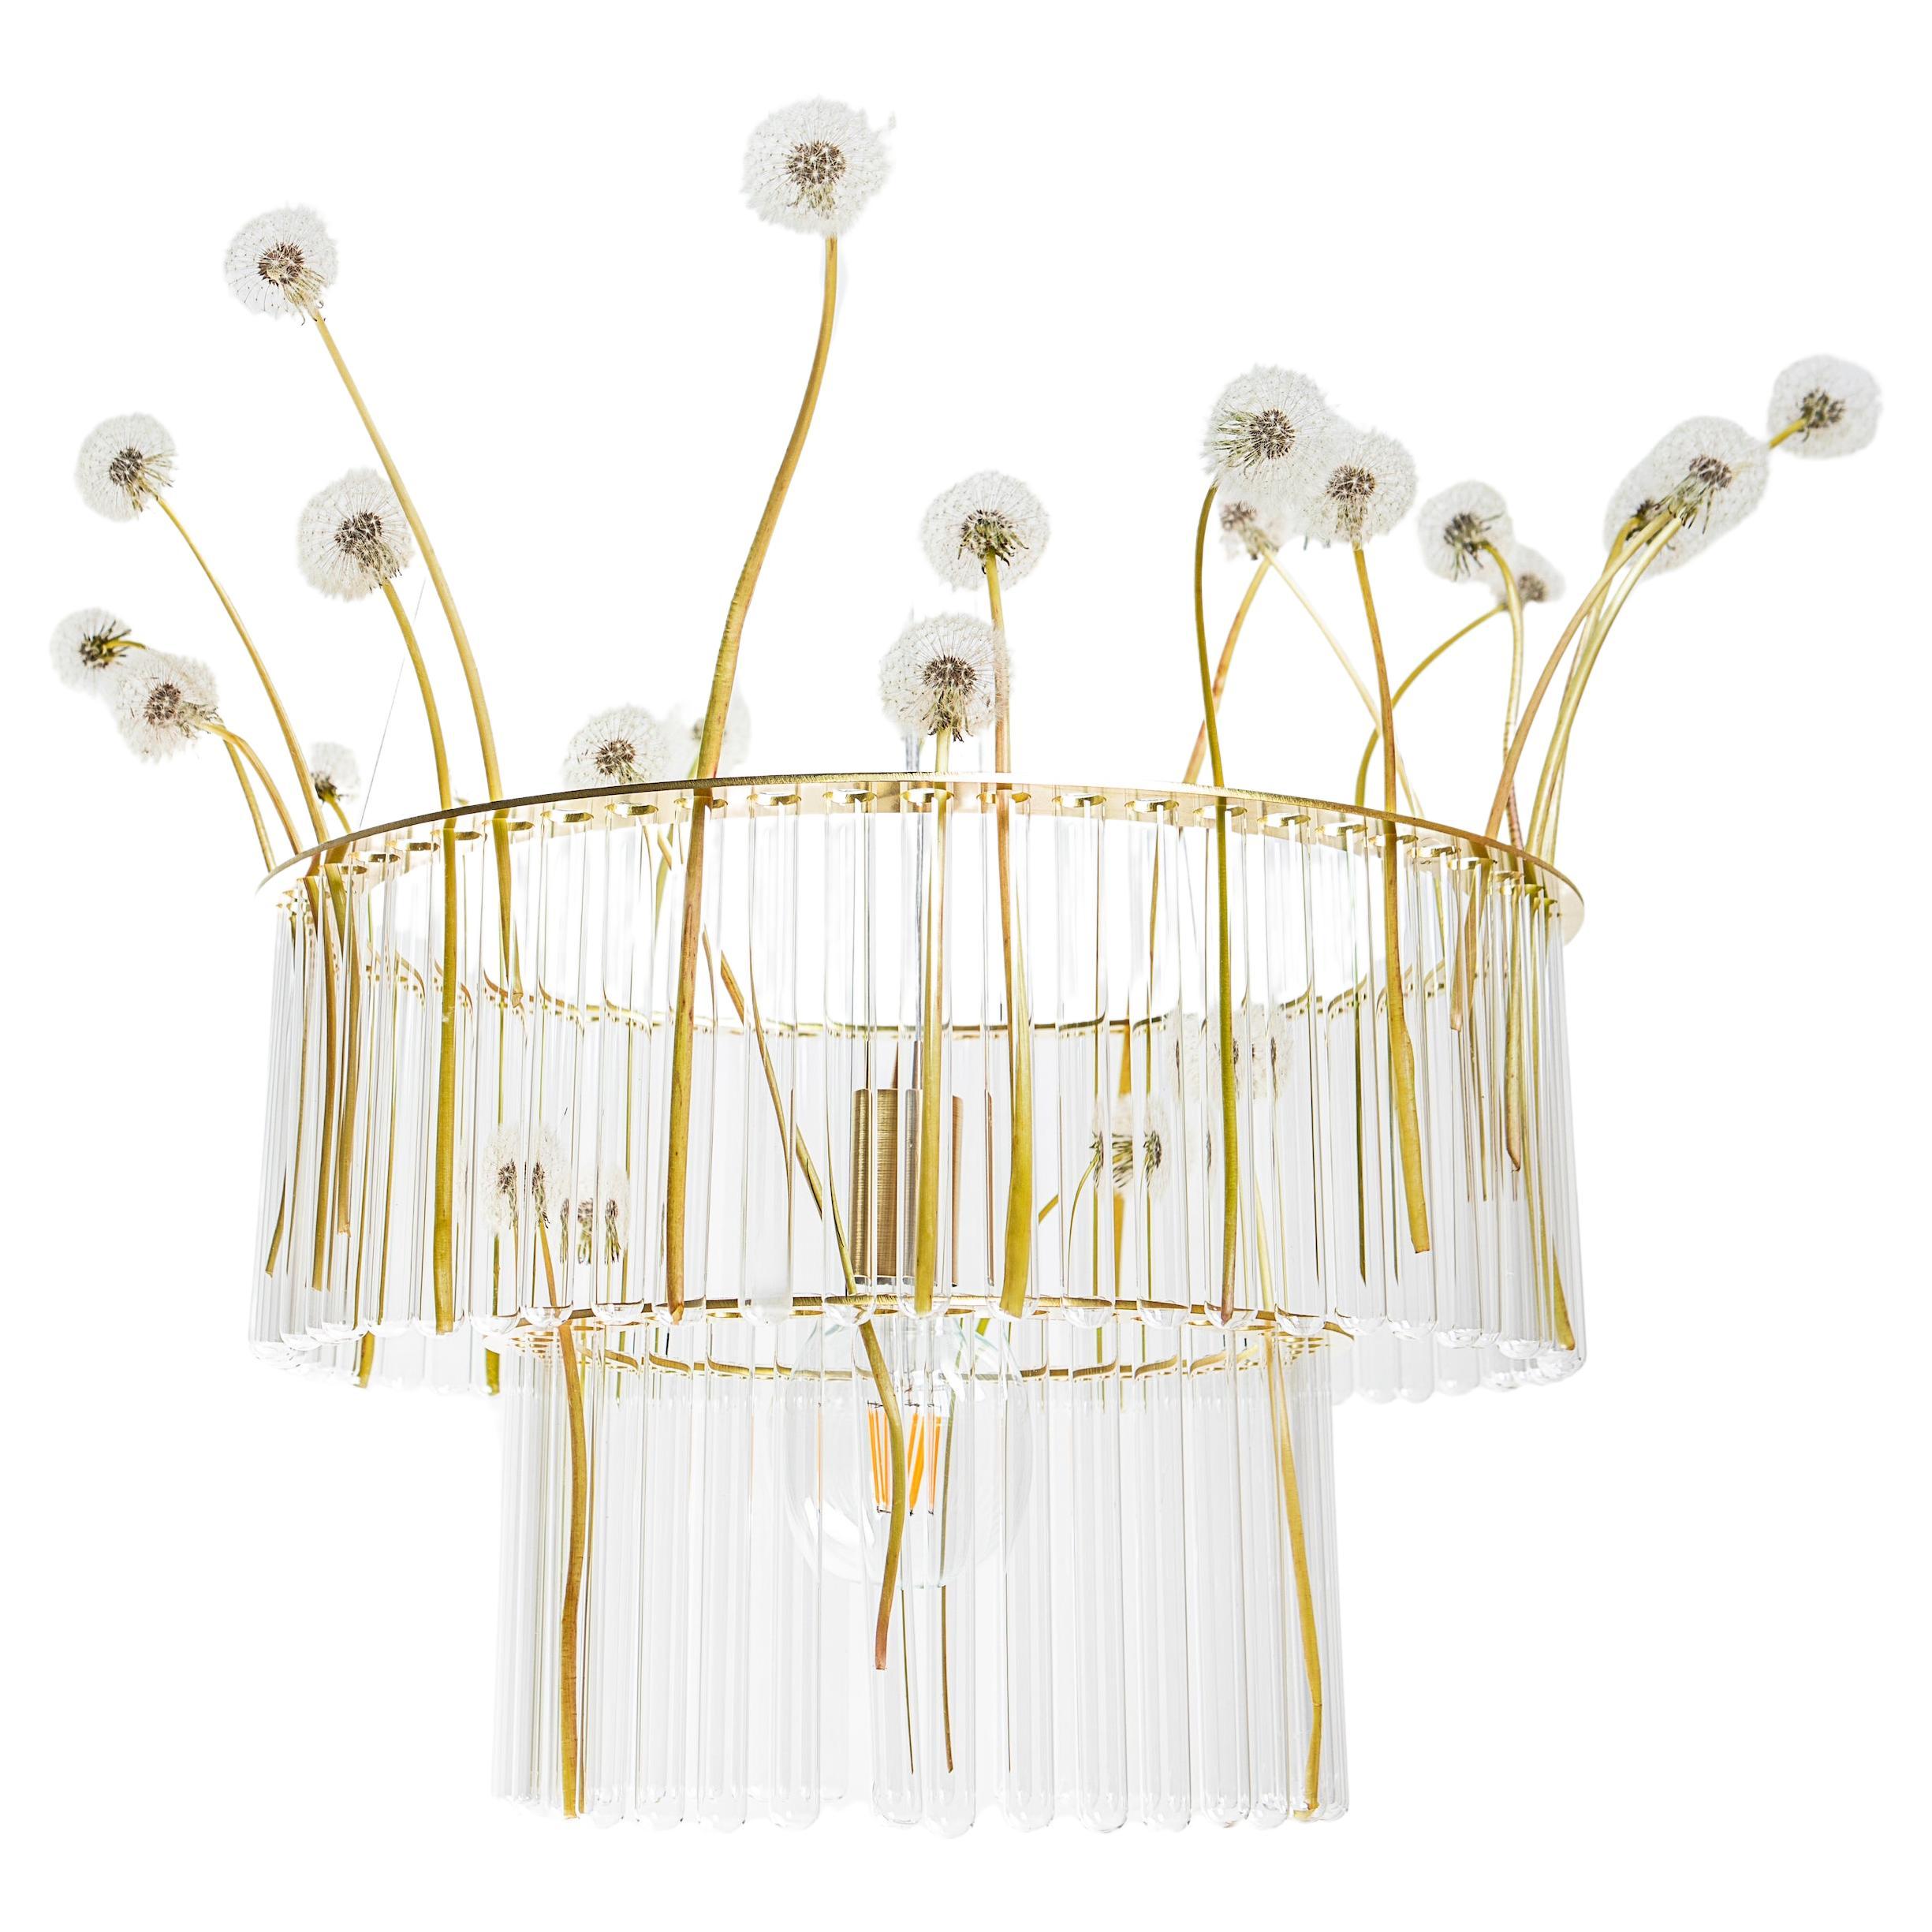 Maria S.C. chandelier is made from laboratory test tubes, set in two brass bands. Surprising material and geometric shape makes this lamp both classic and modern. It recalls Art Deco forms in a unique contemporary way. The use of ready-made objects